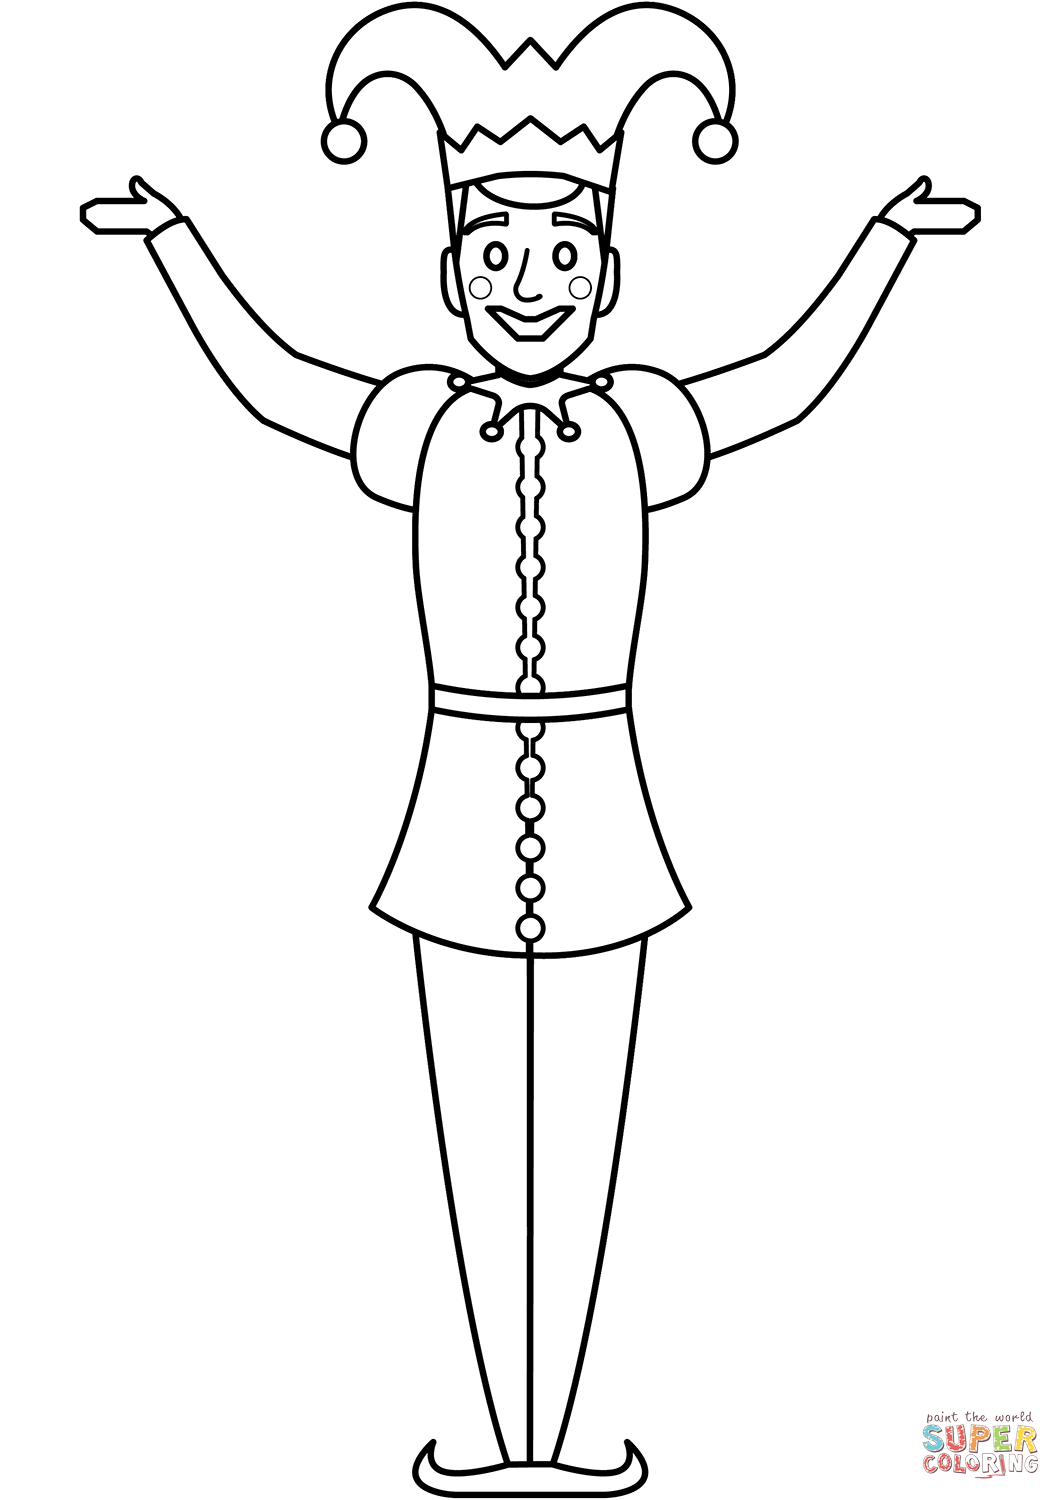 Jester coloring page free printable coloring pages